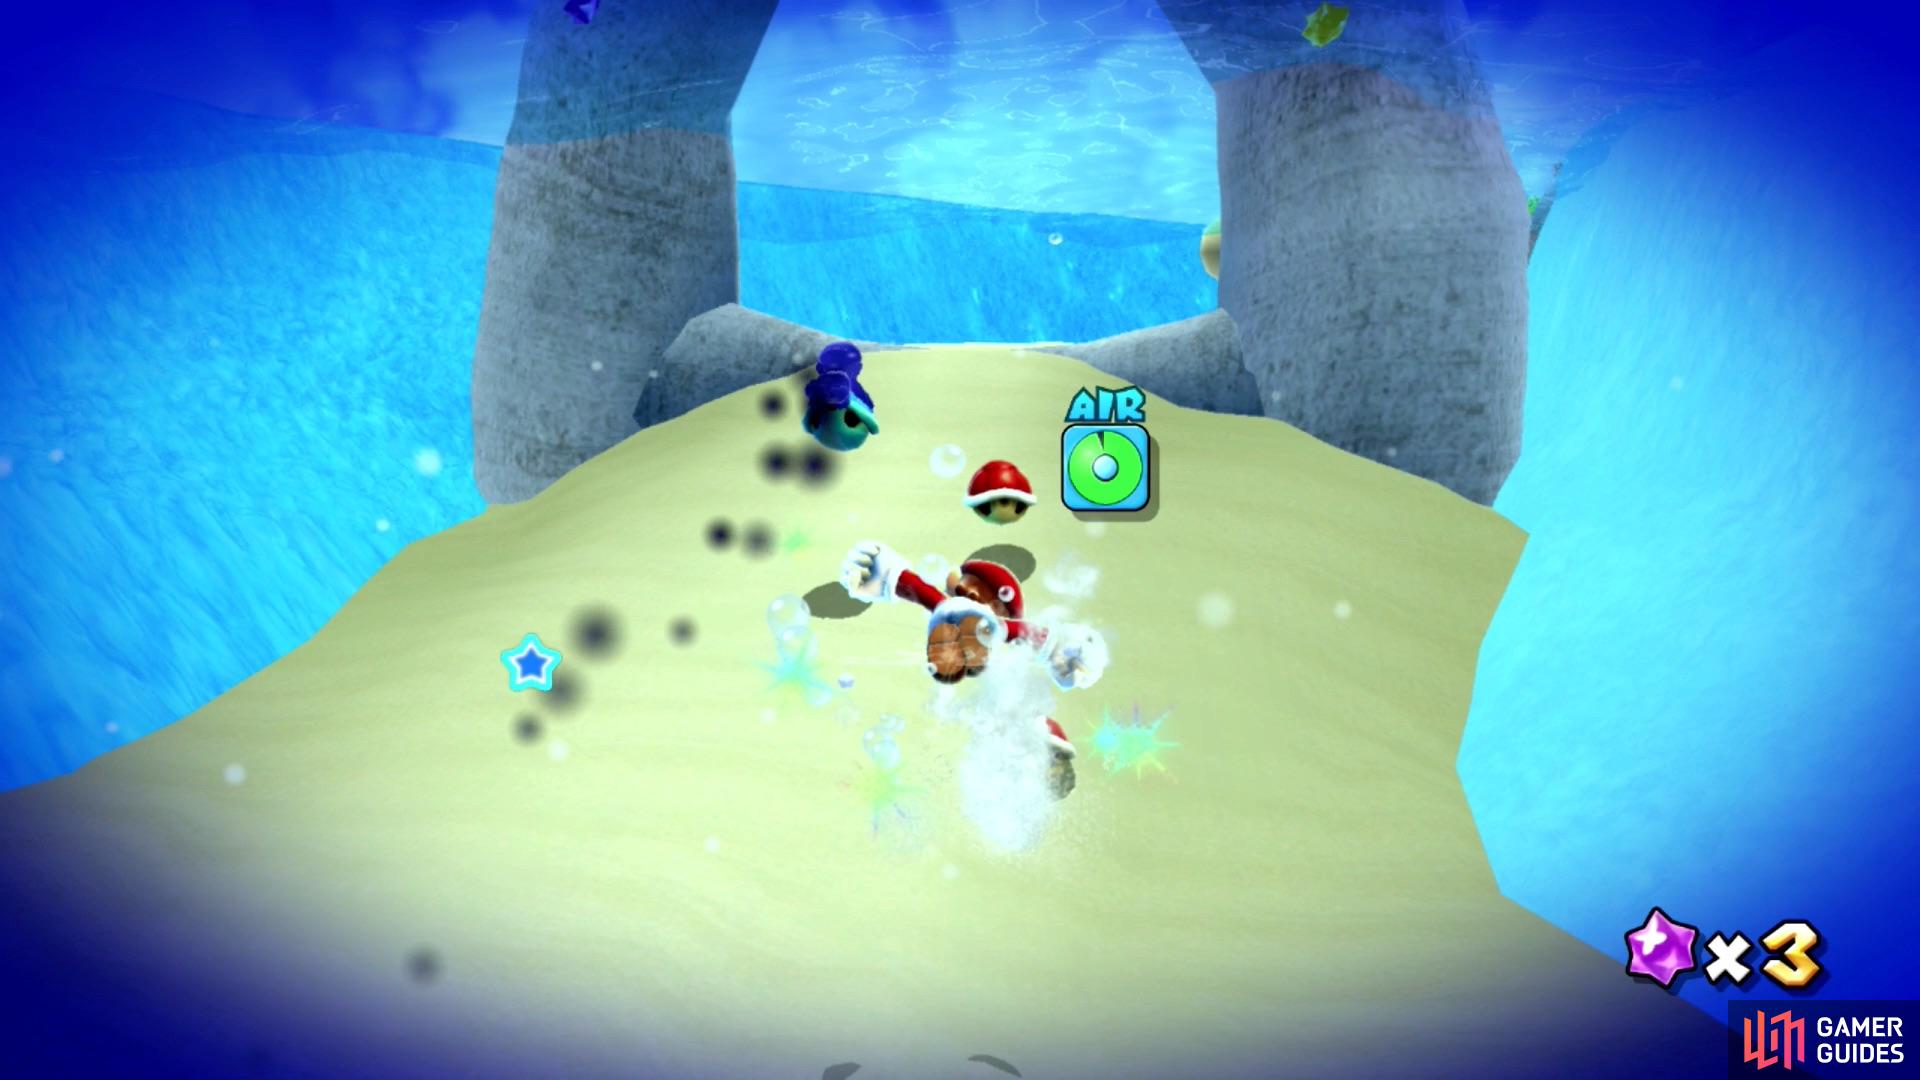 Cosmic Mario will materialize a shell and cannot be hit by thrown Red Shells.